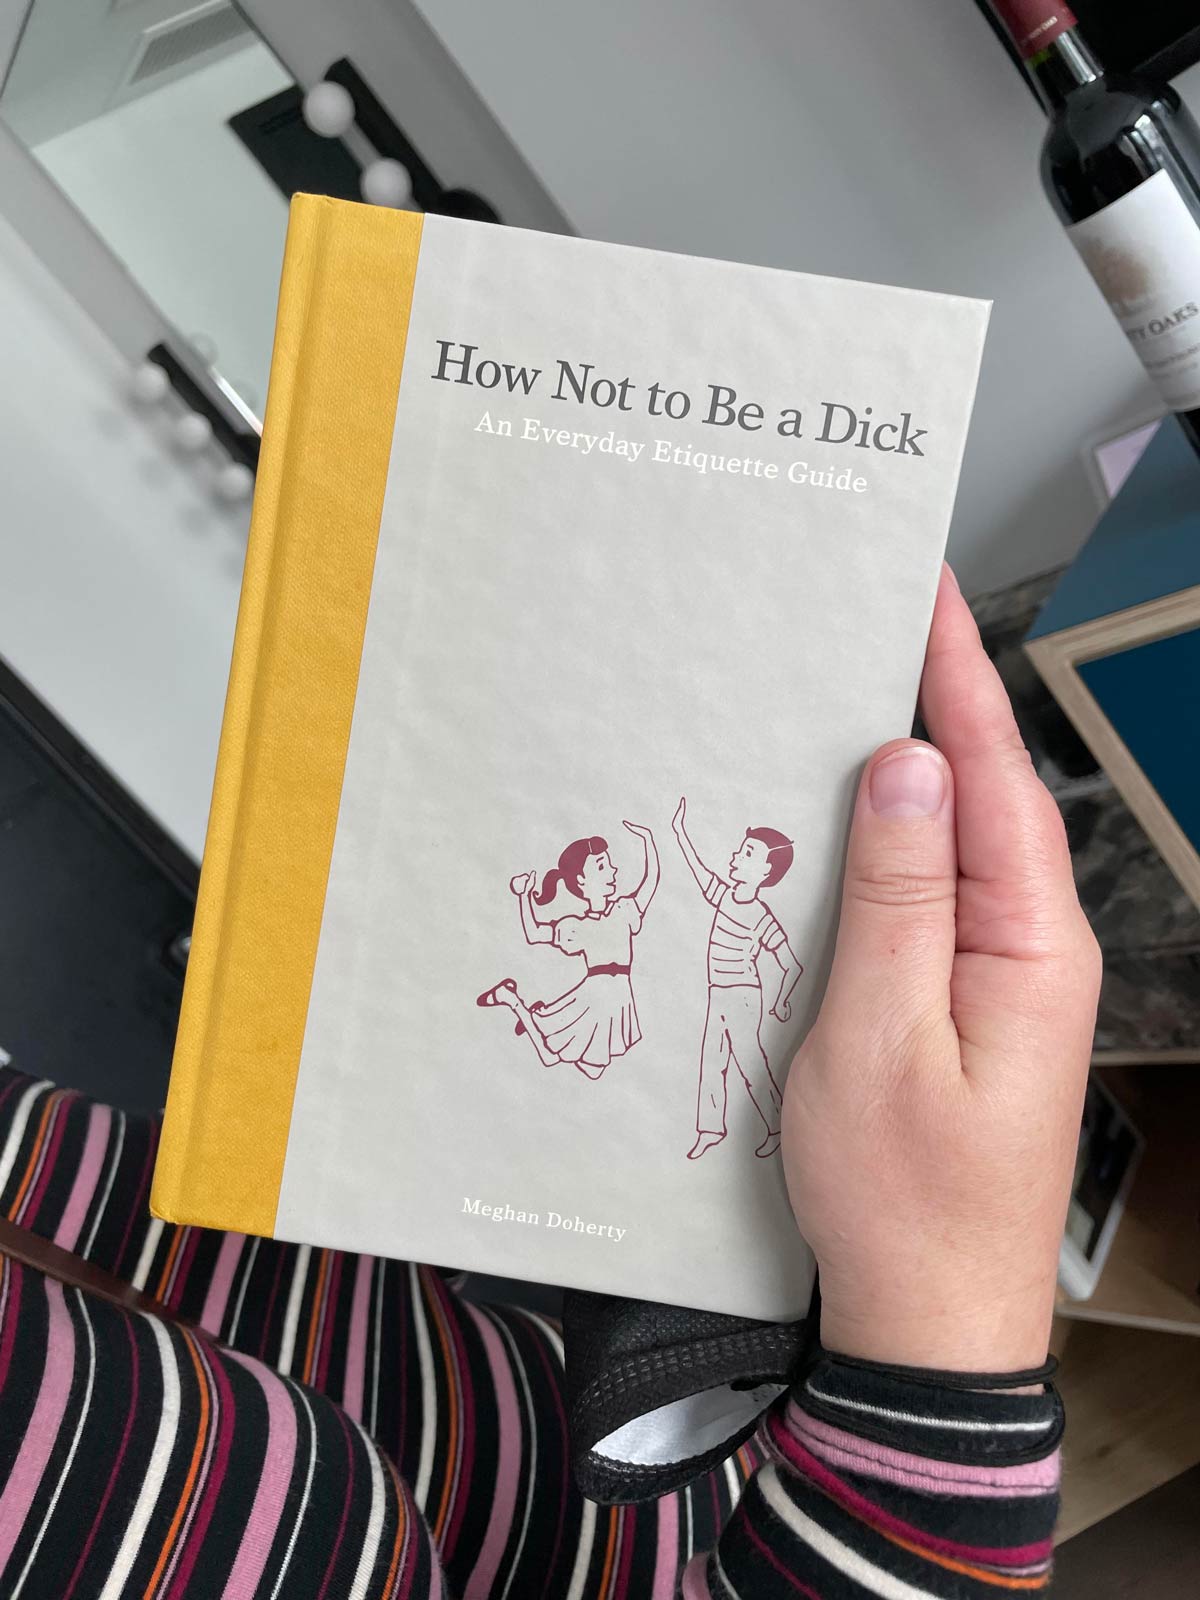 Instead of a Bible, this hotel has "How Not to Be a Dick"